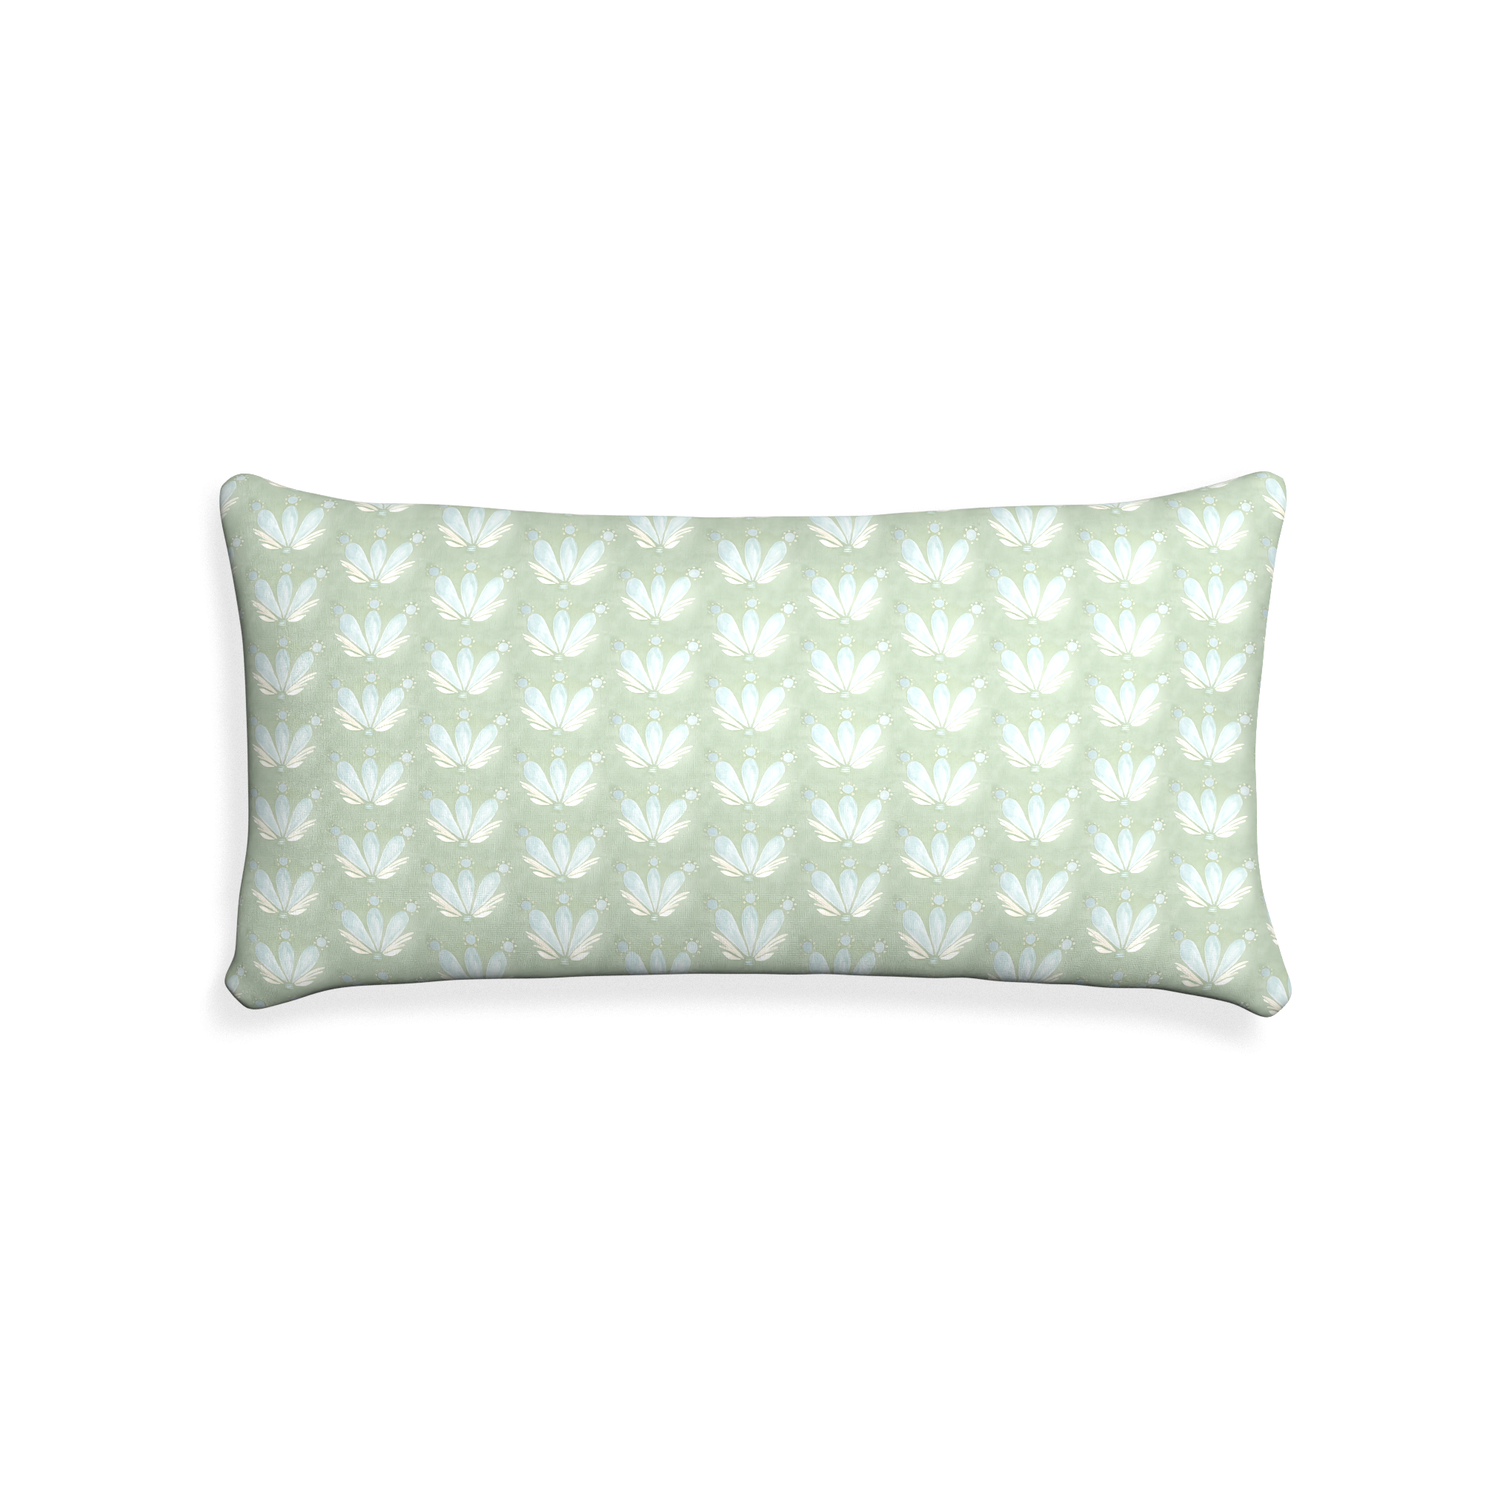 Midi-lumbar serena sea salt custom blue & green floral drop repeatpillow with none on white background